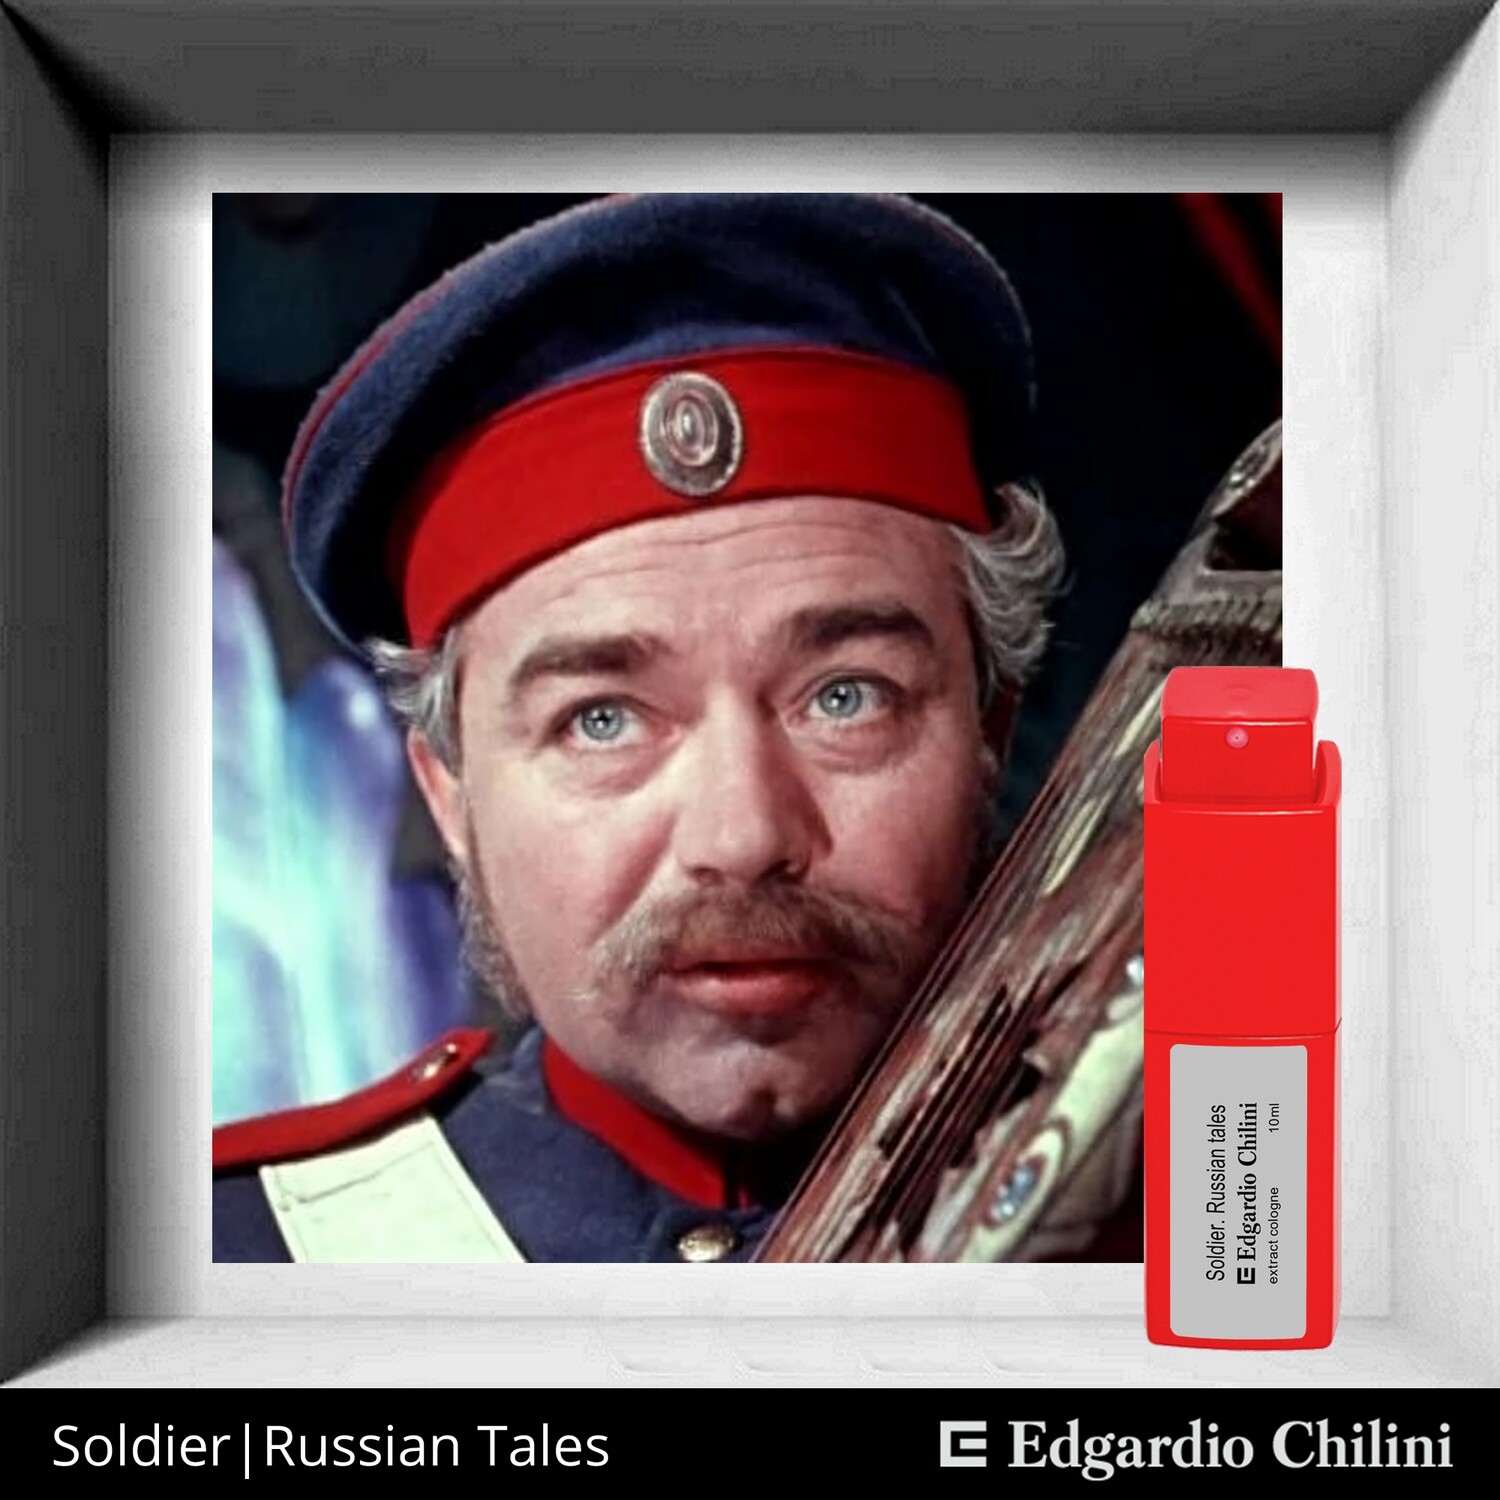 Edgardio Chilini, Soldier. Russian tales, resinous fruity fragrance